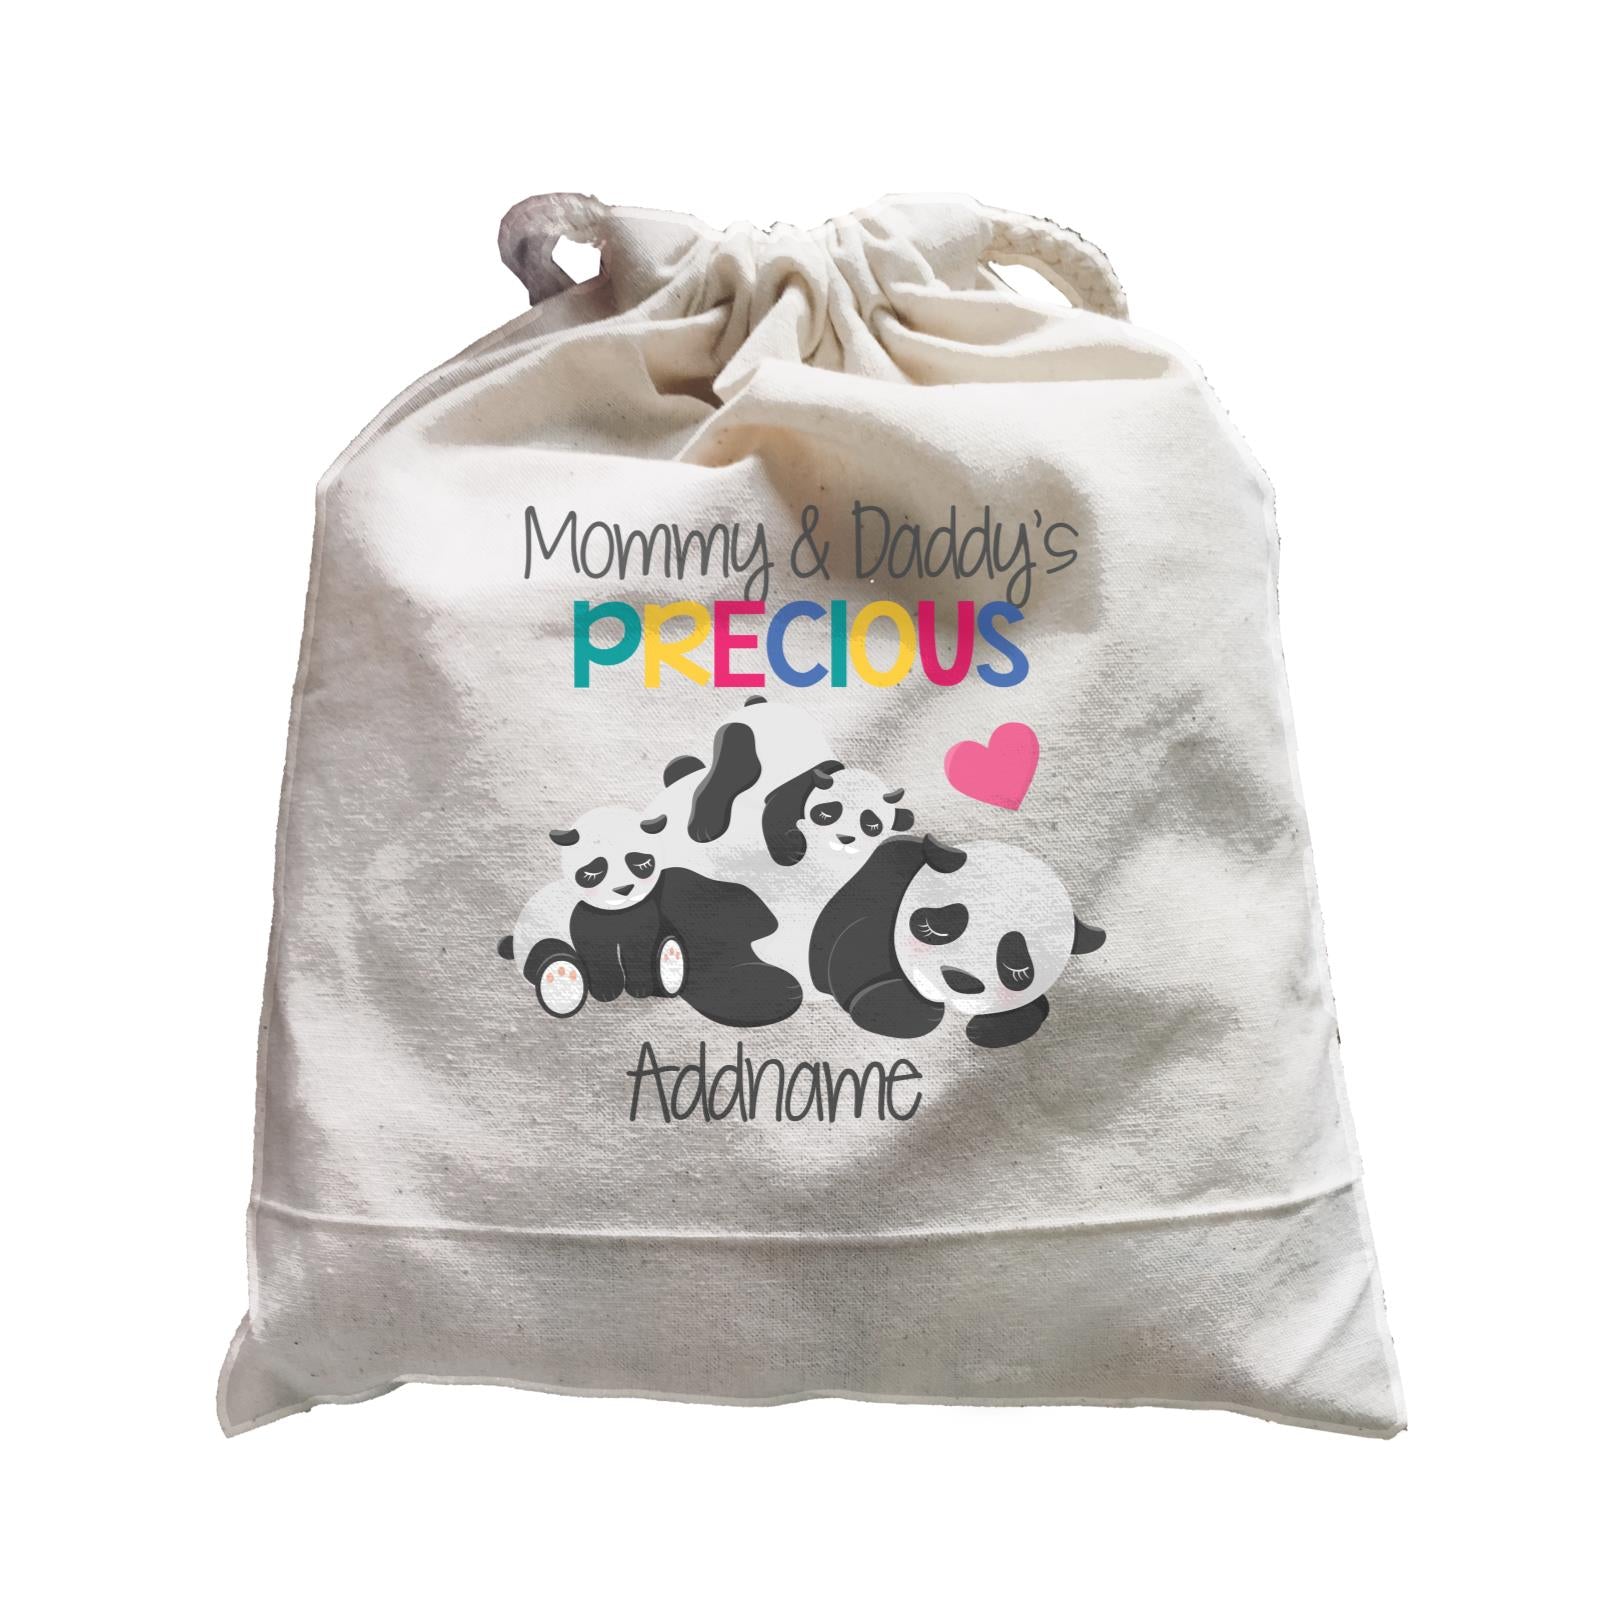 Animal & Loved Ones Mommy & Daddy's Precious Panda Family Addname Satchel